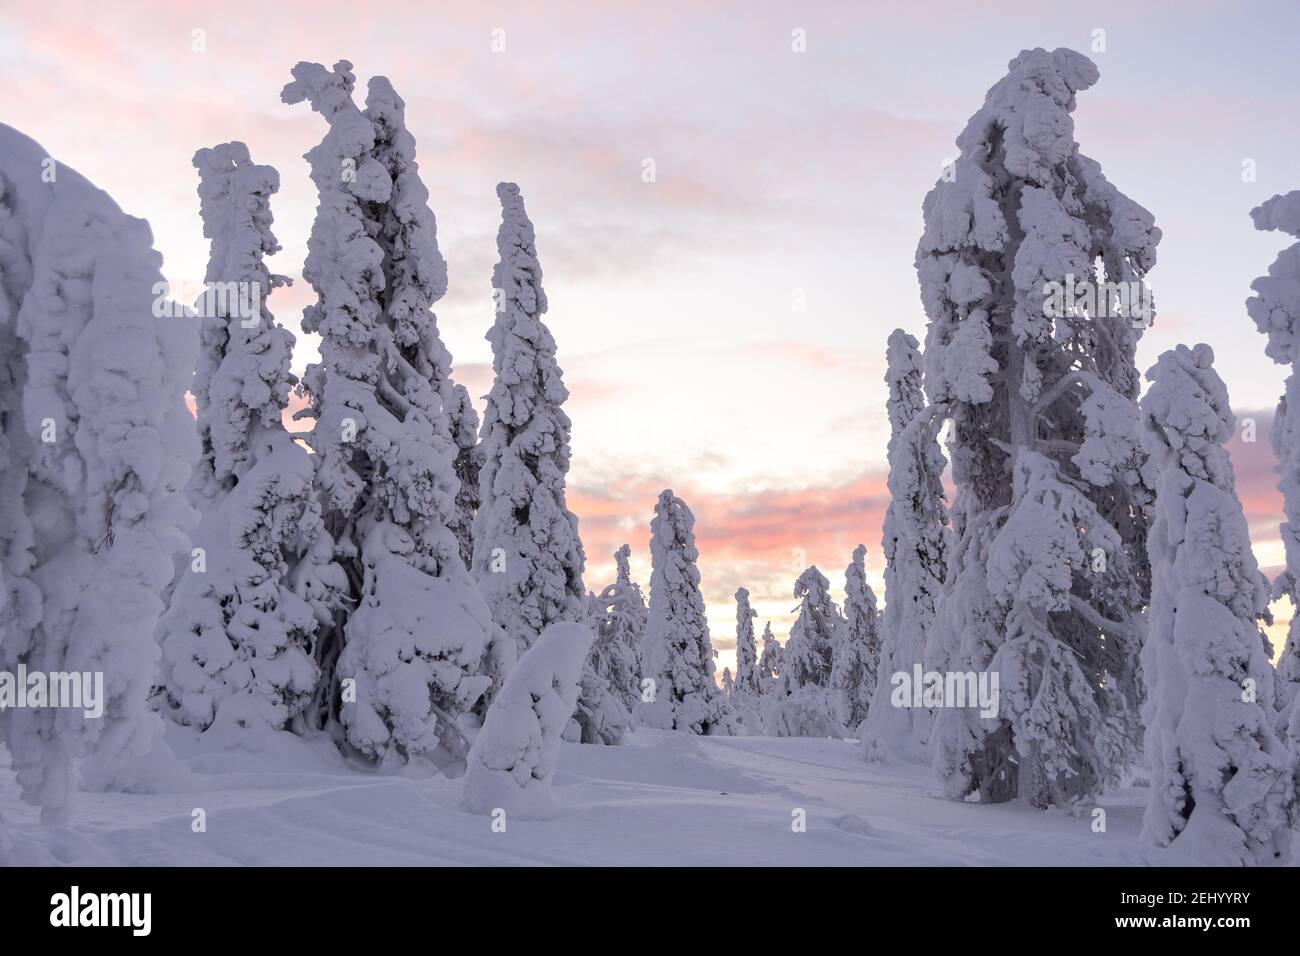 Snowy trees and fell in Lapland, Finland Stock Photo